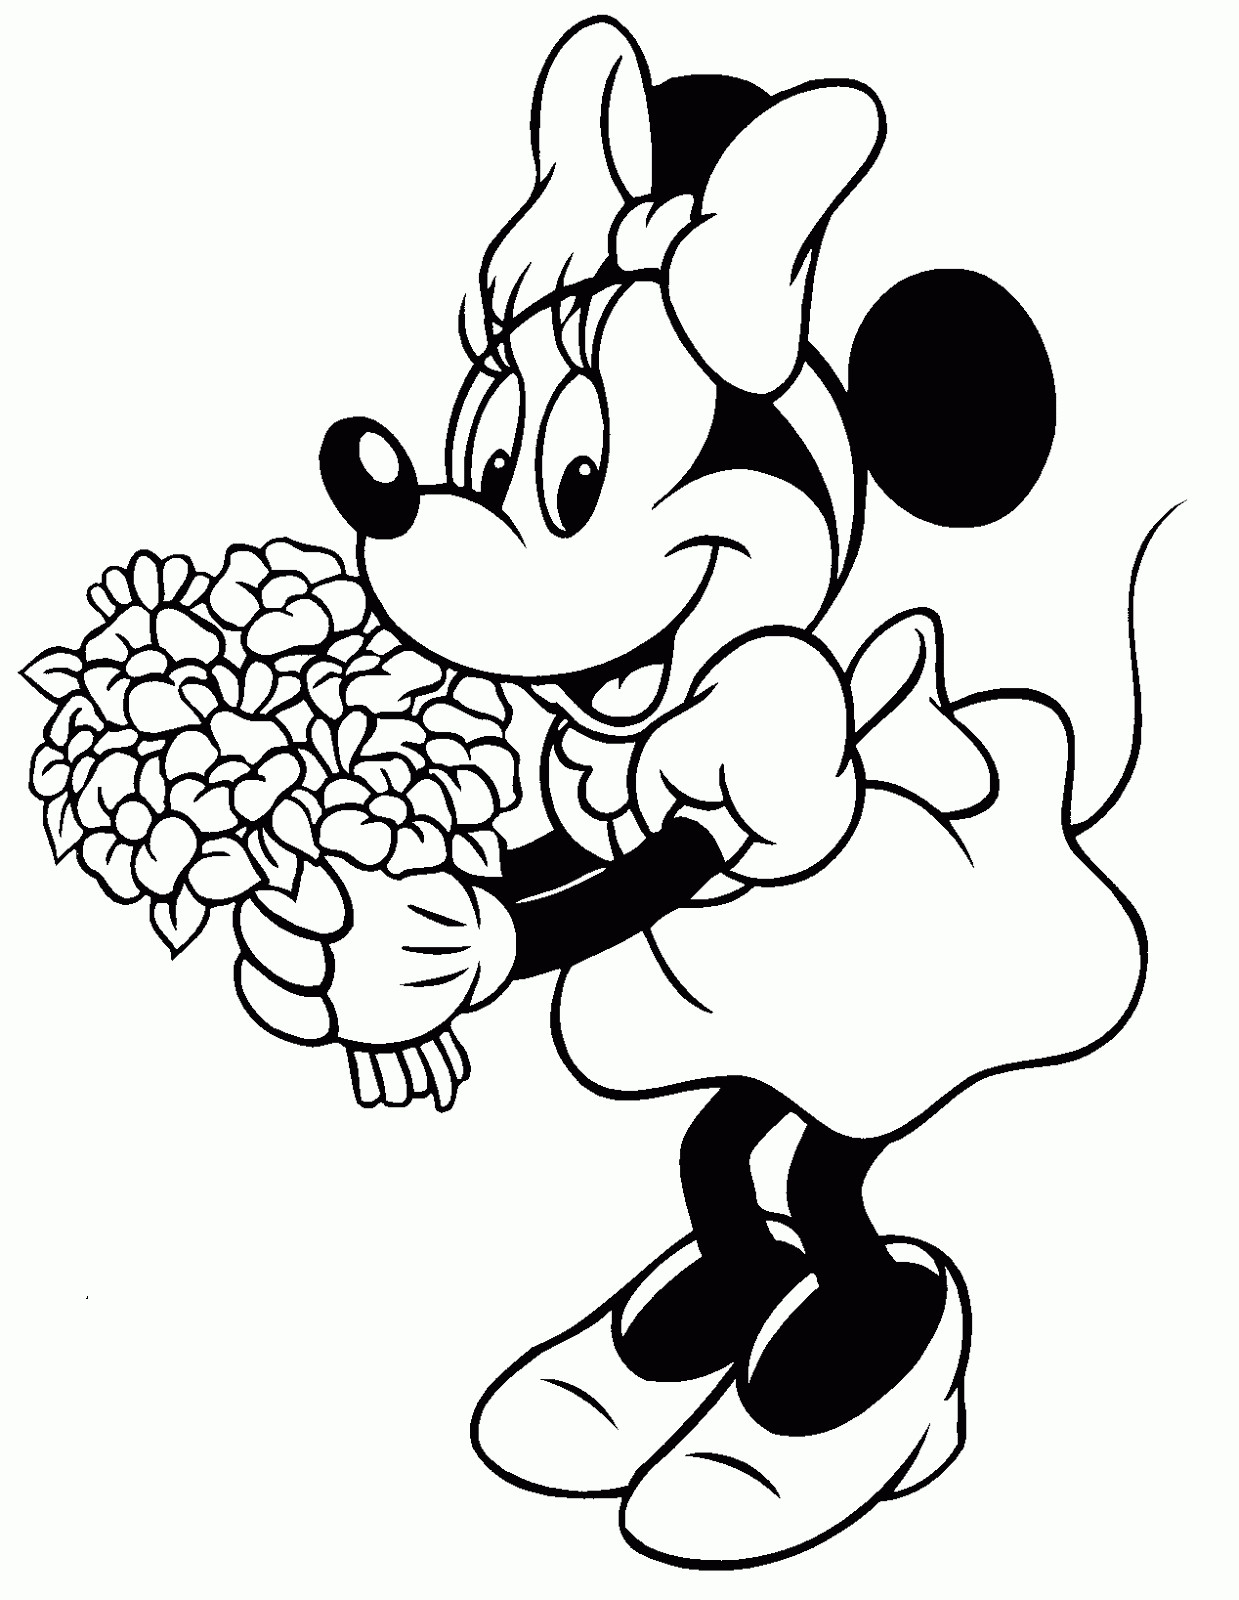 Disney Coloring Books
 DISNEY COLORING PAGES